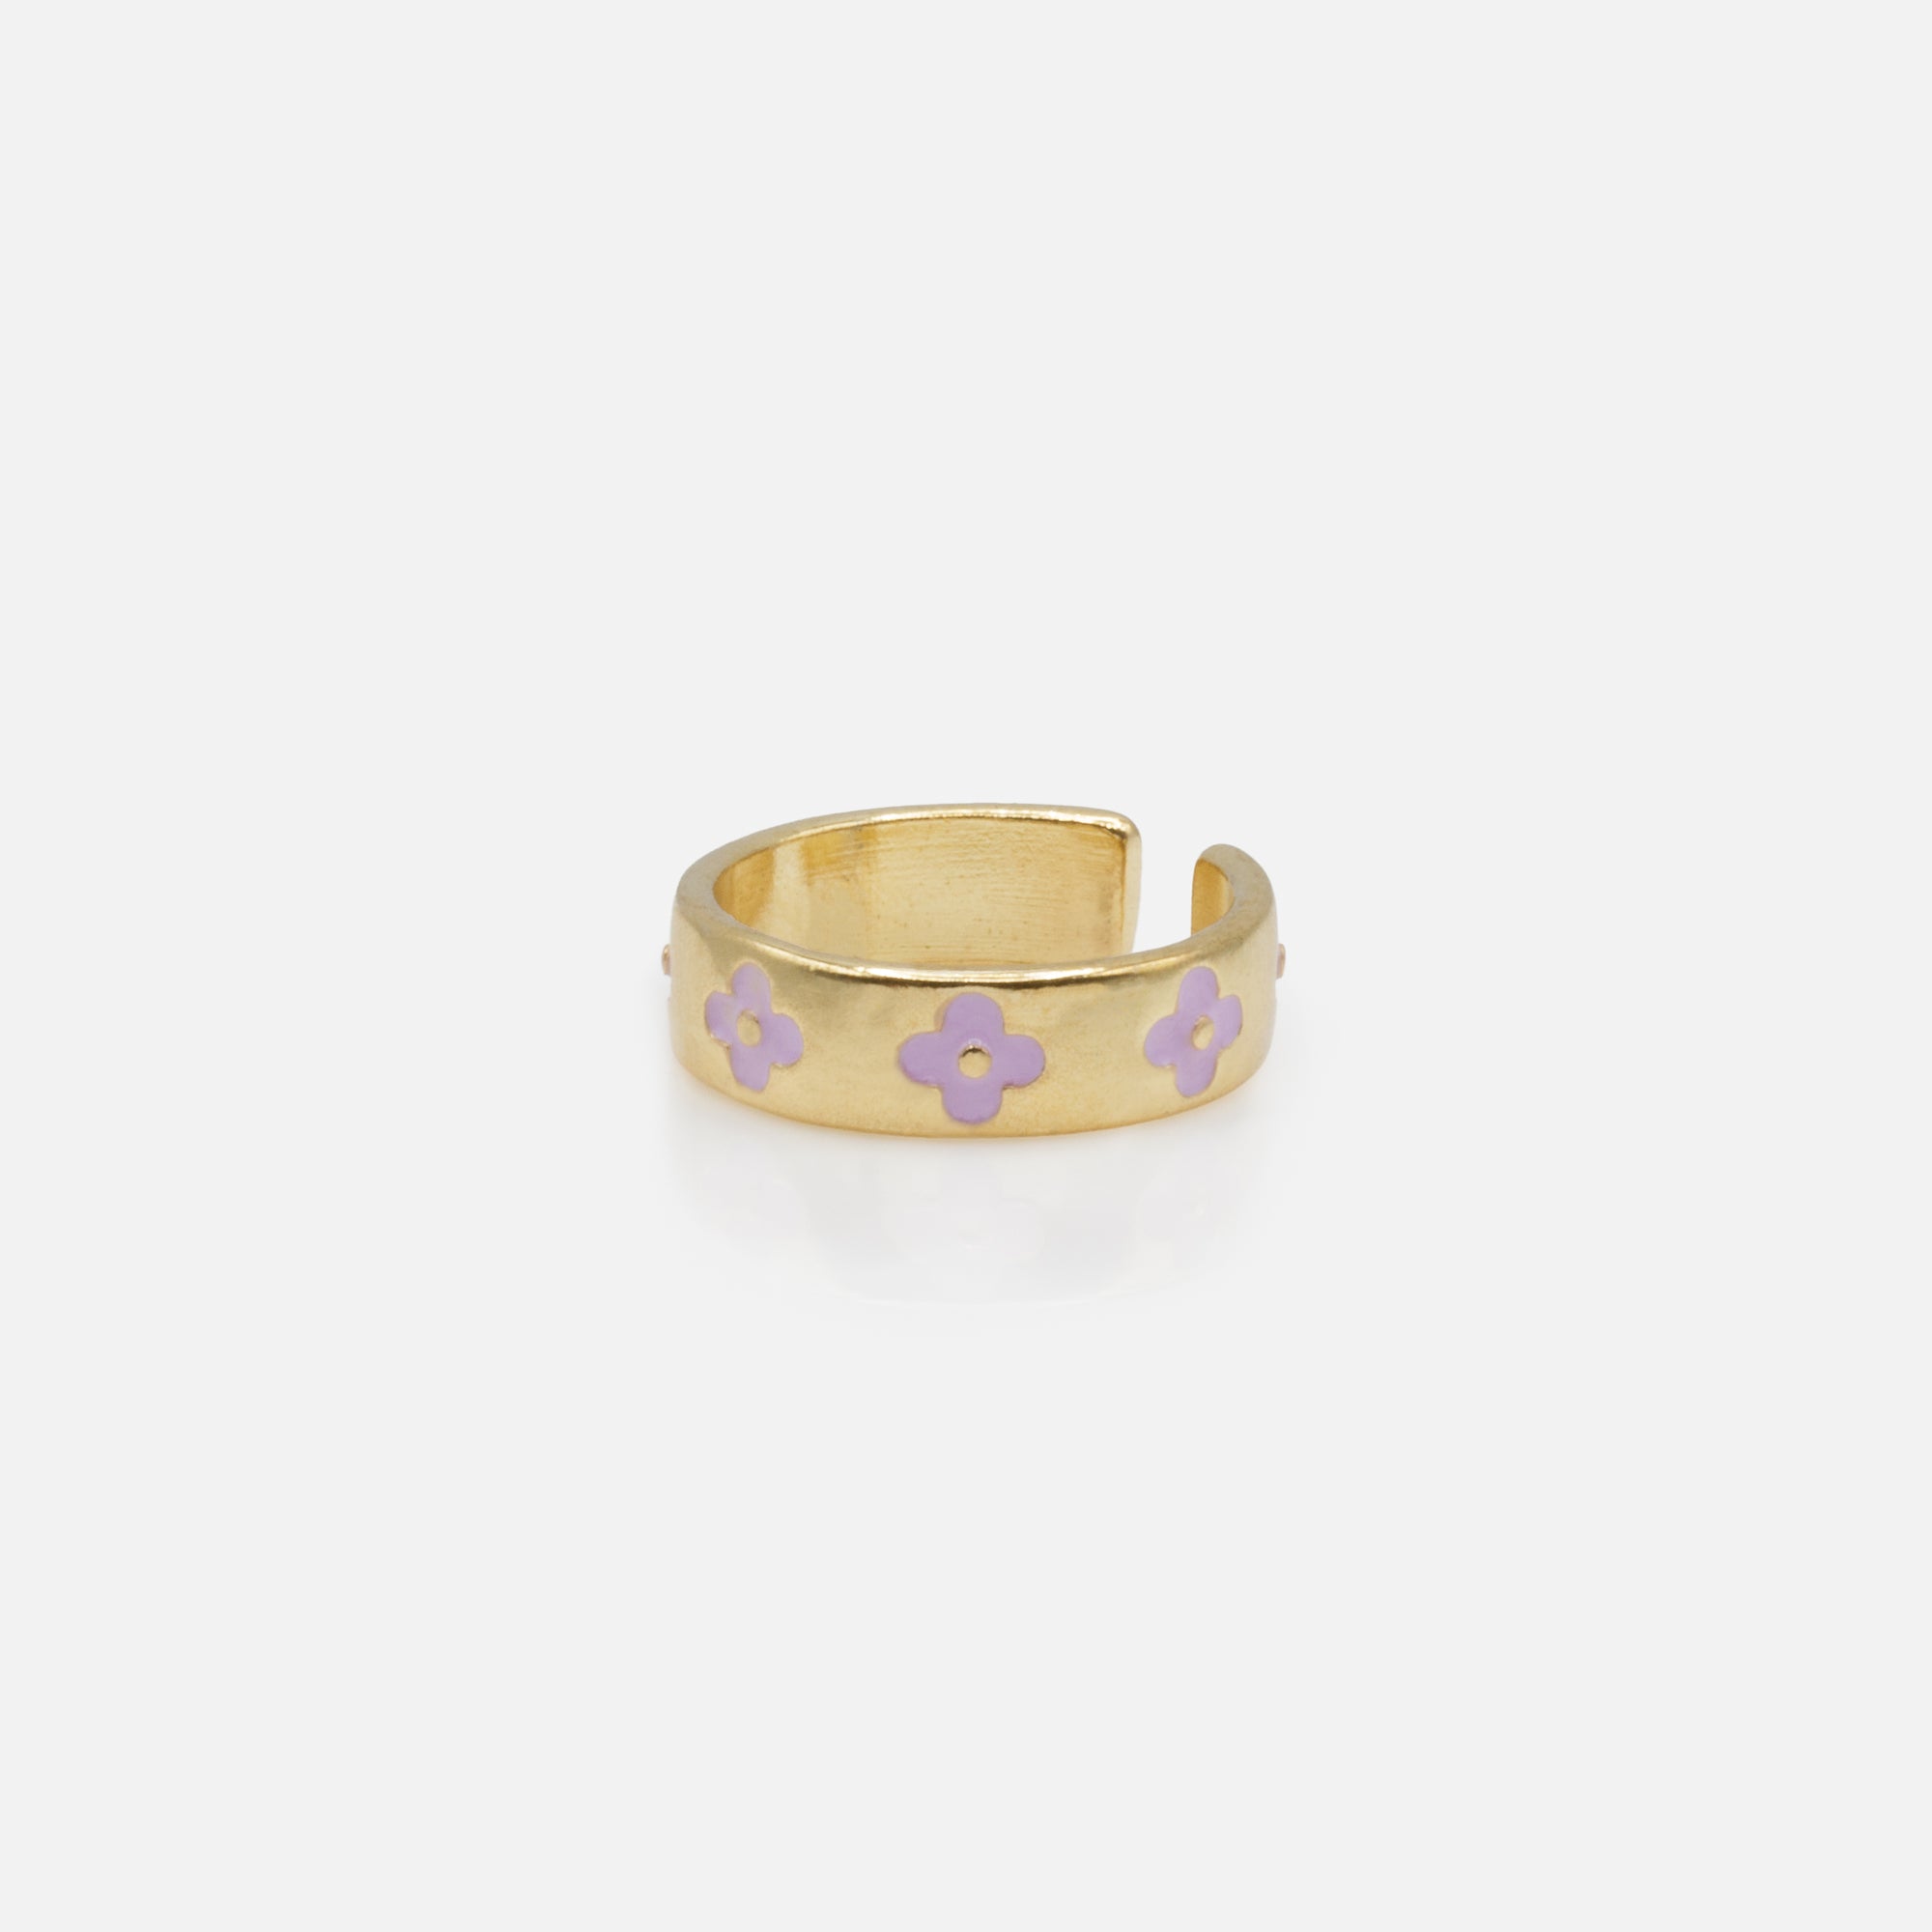 Set of two golden open rings with lilac and pink flowers